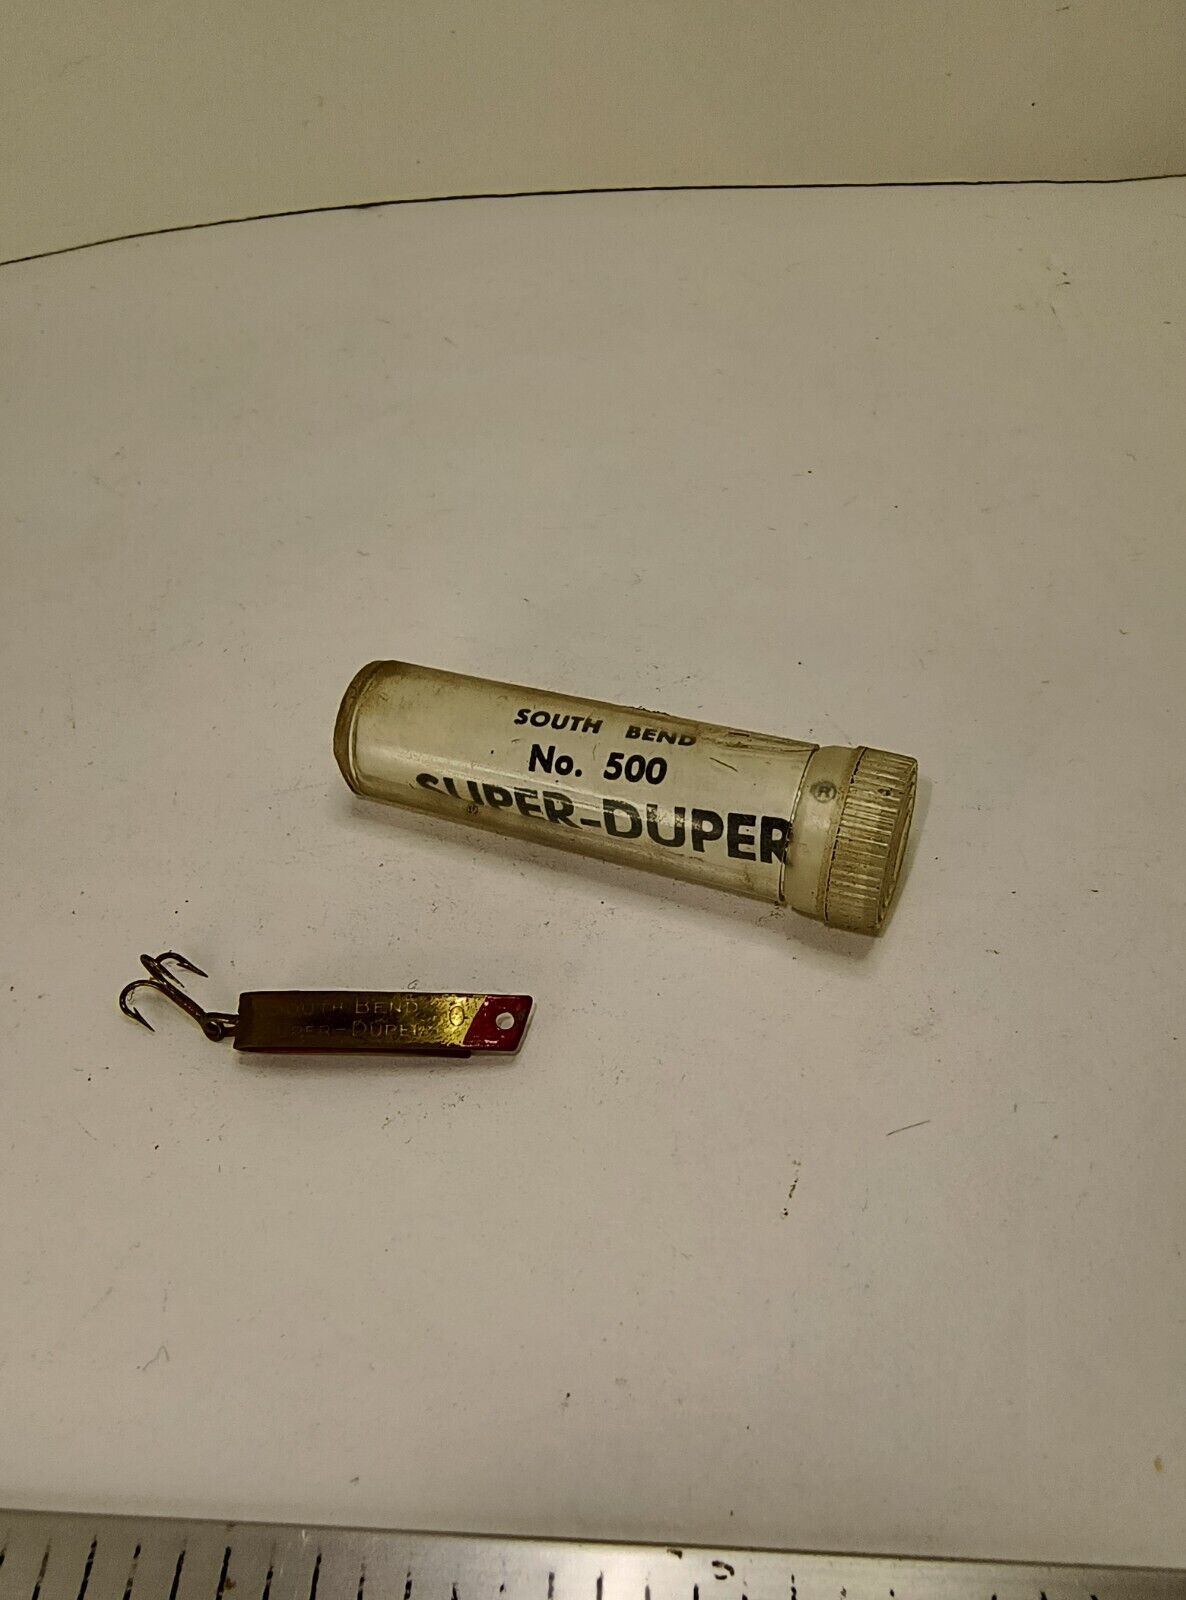 Vintage Fishing Lure - South Bend Super Duper no. 500 - Pioneer Recycling  Services